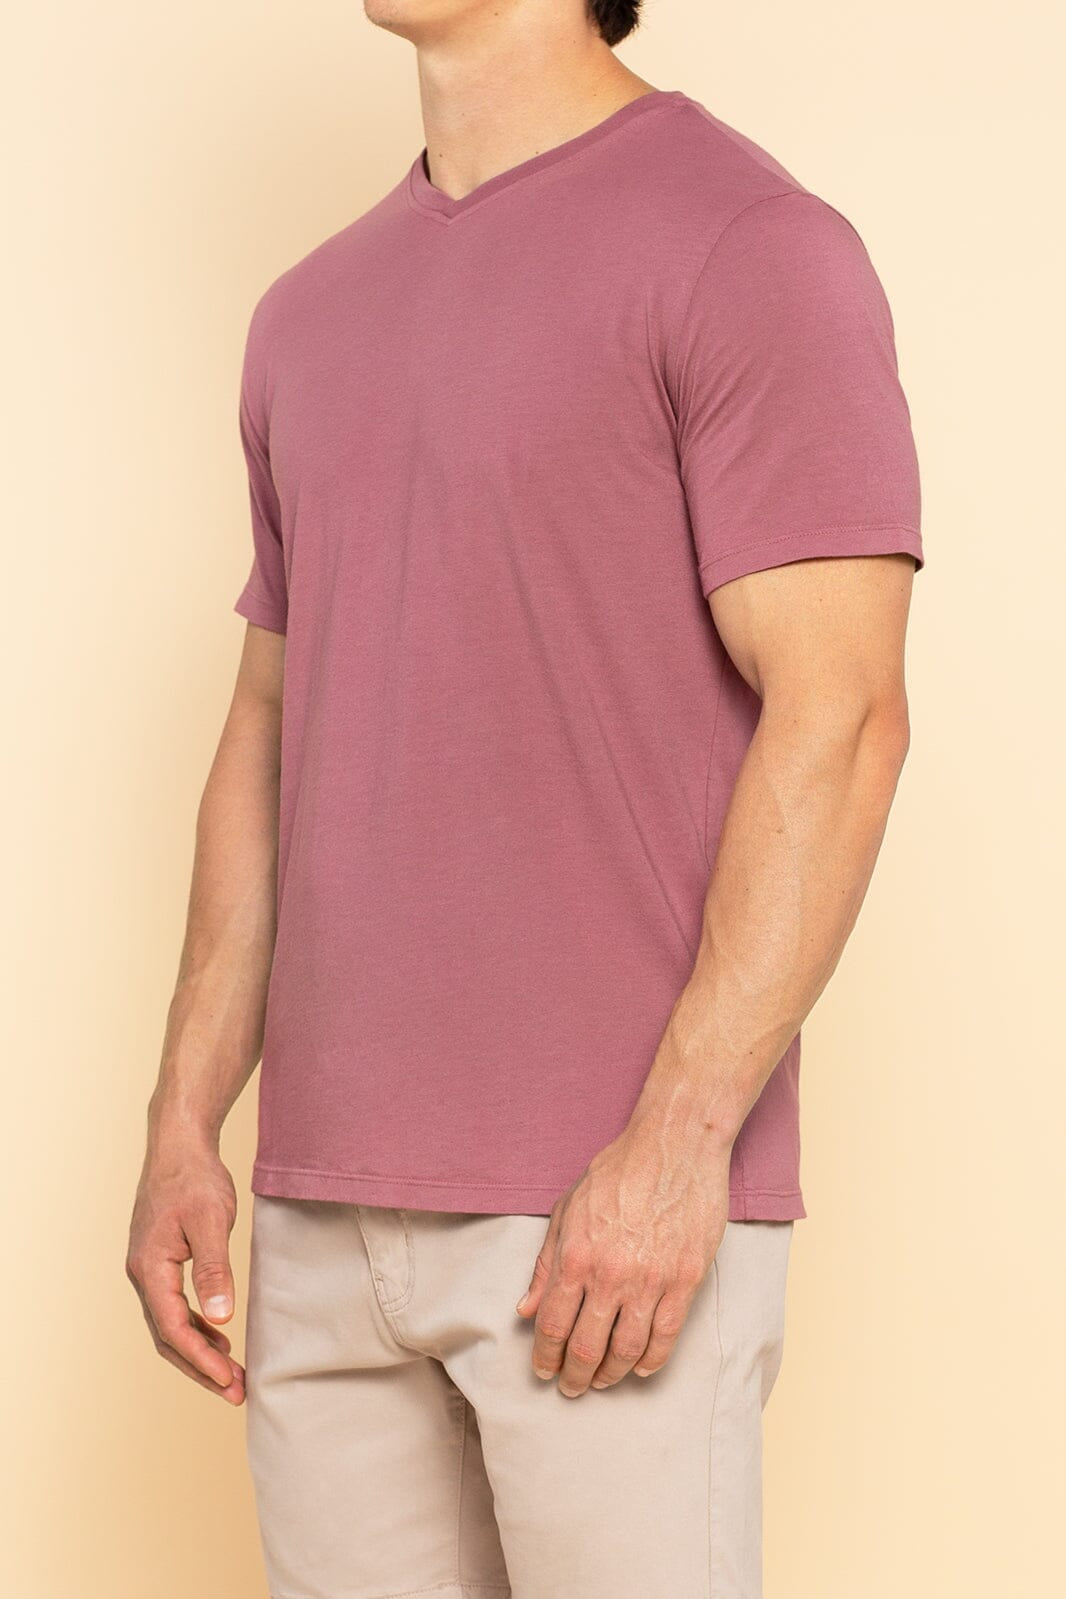 V-NECK TEE - CRUSHED BERRY - XS